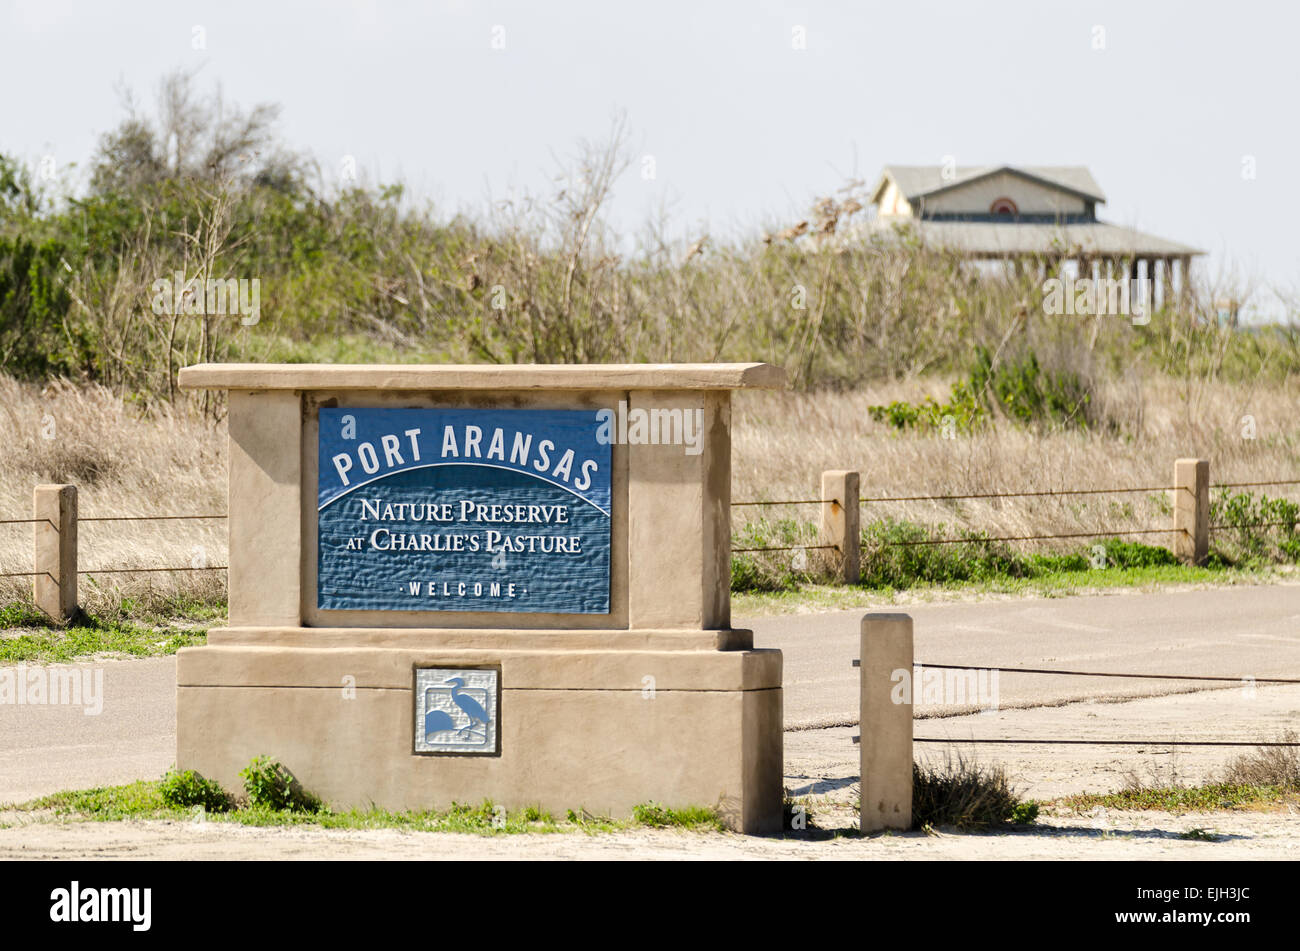 Entrance to the Nature Preserve at Charlie's Pasture in Port Aransas, Texas, USA Stock Photo